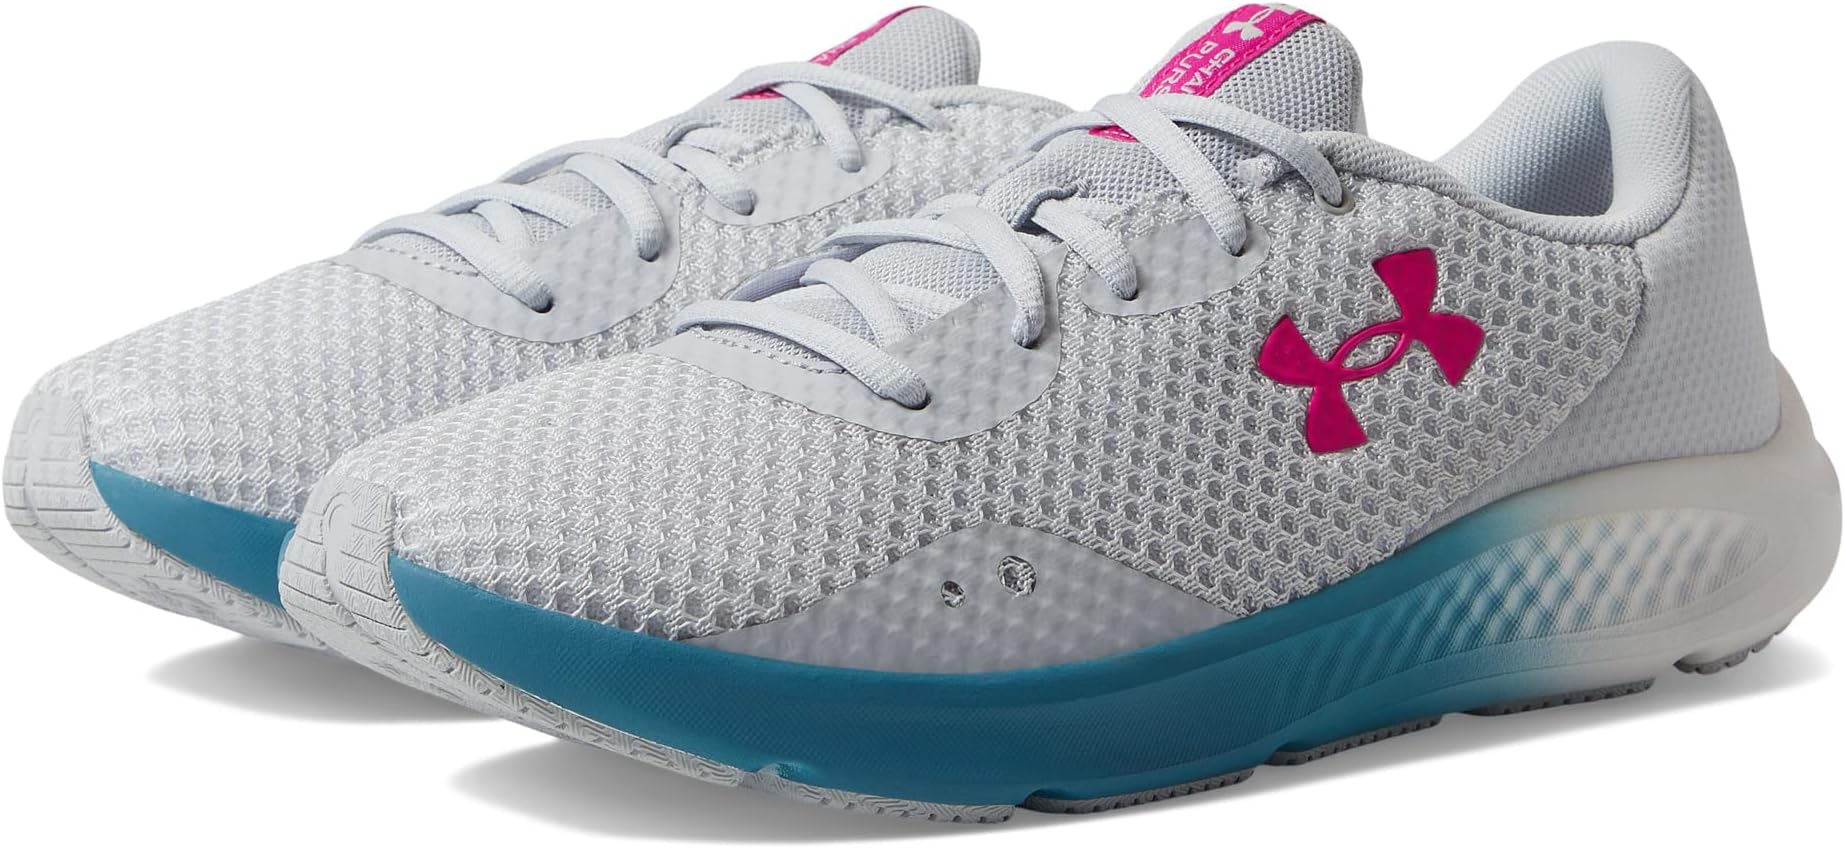 Кроссовки Charged Pursuit 3 Under Armour, цвет Halo Gray/Halo Gray/Rebel Pink